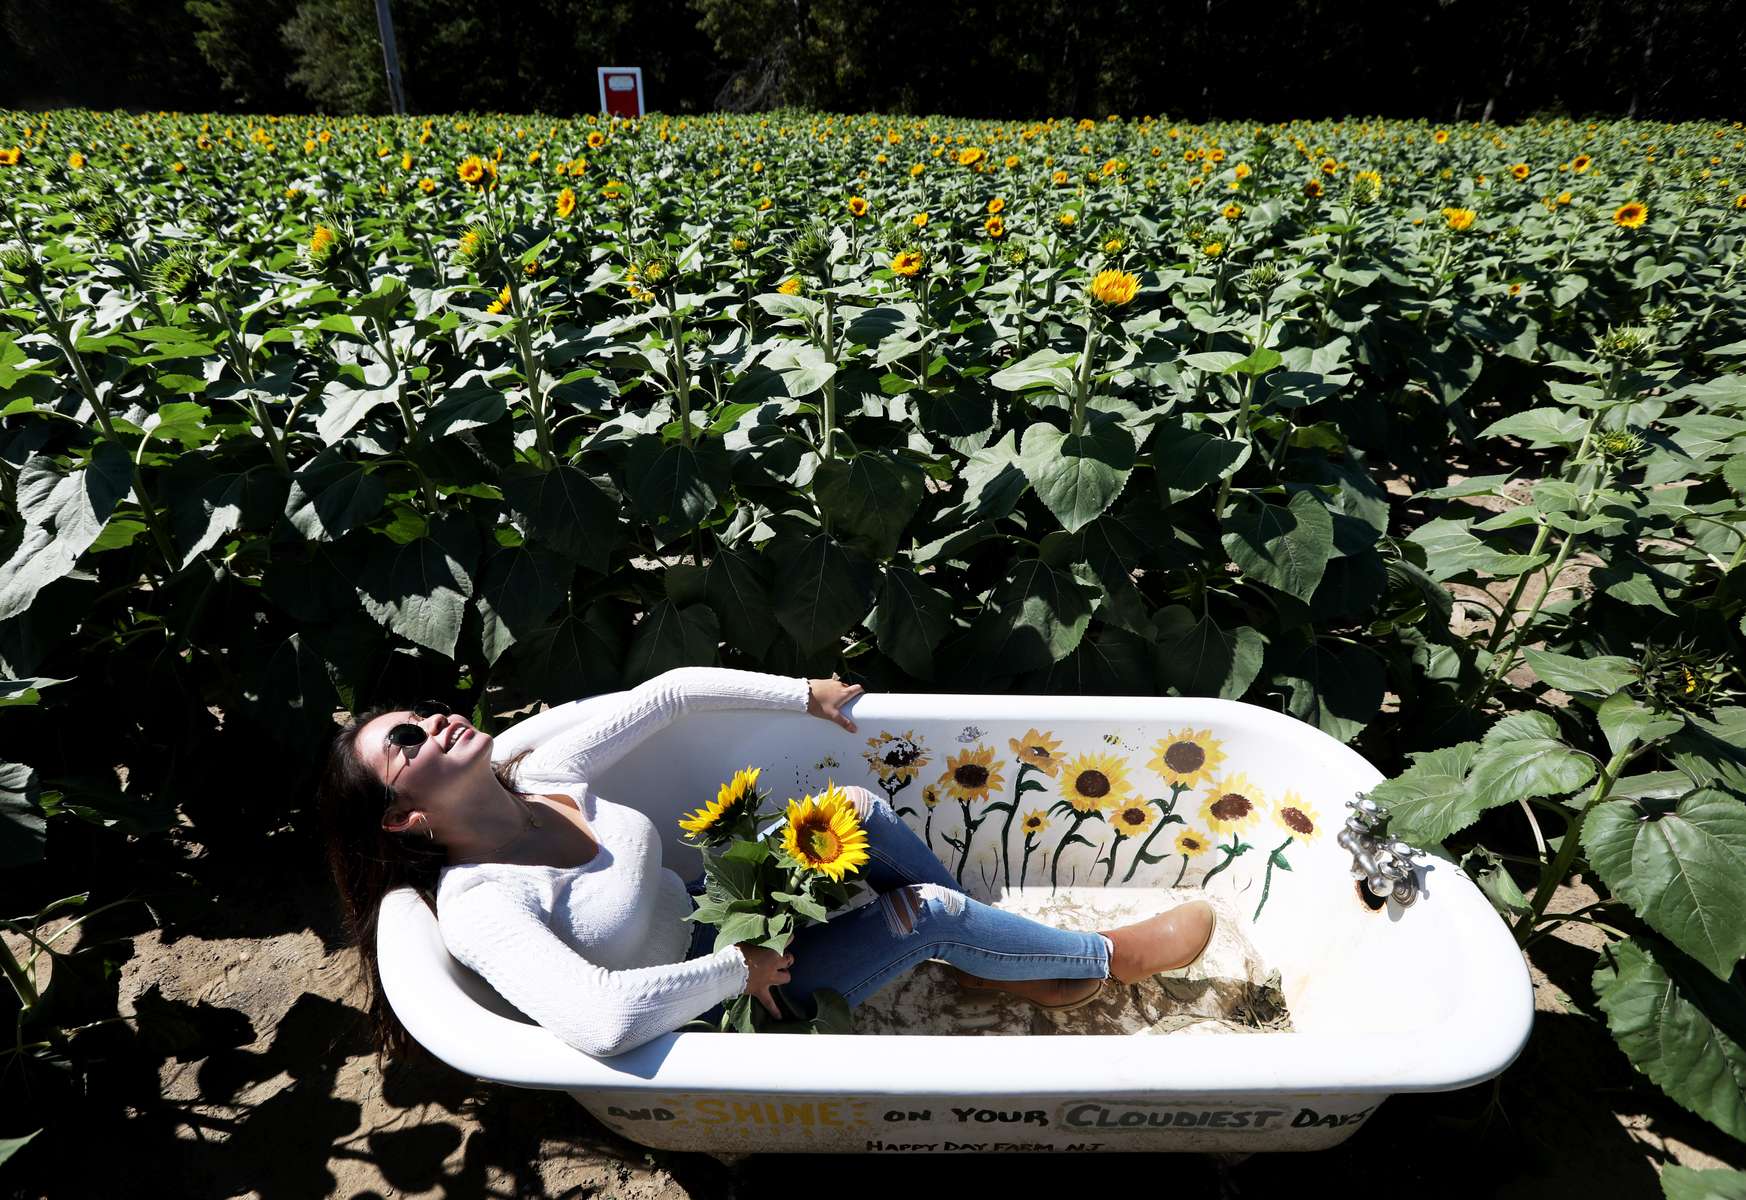 Annabella LaMantia relaxes in a bathtub surrounded by sunflowers at Happy Day Farm in Manalapan.